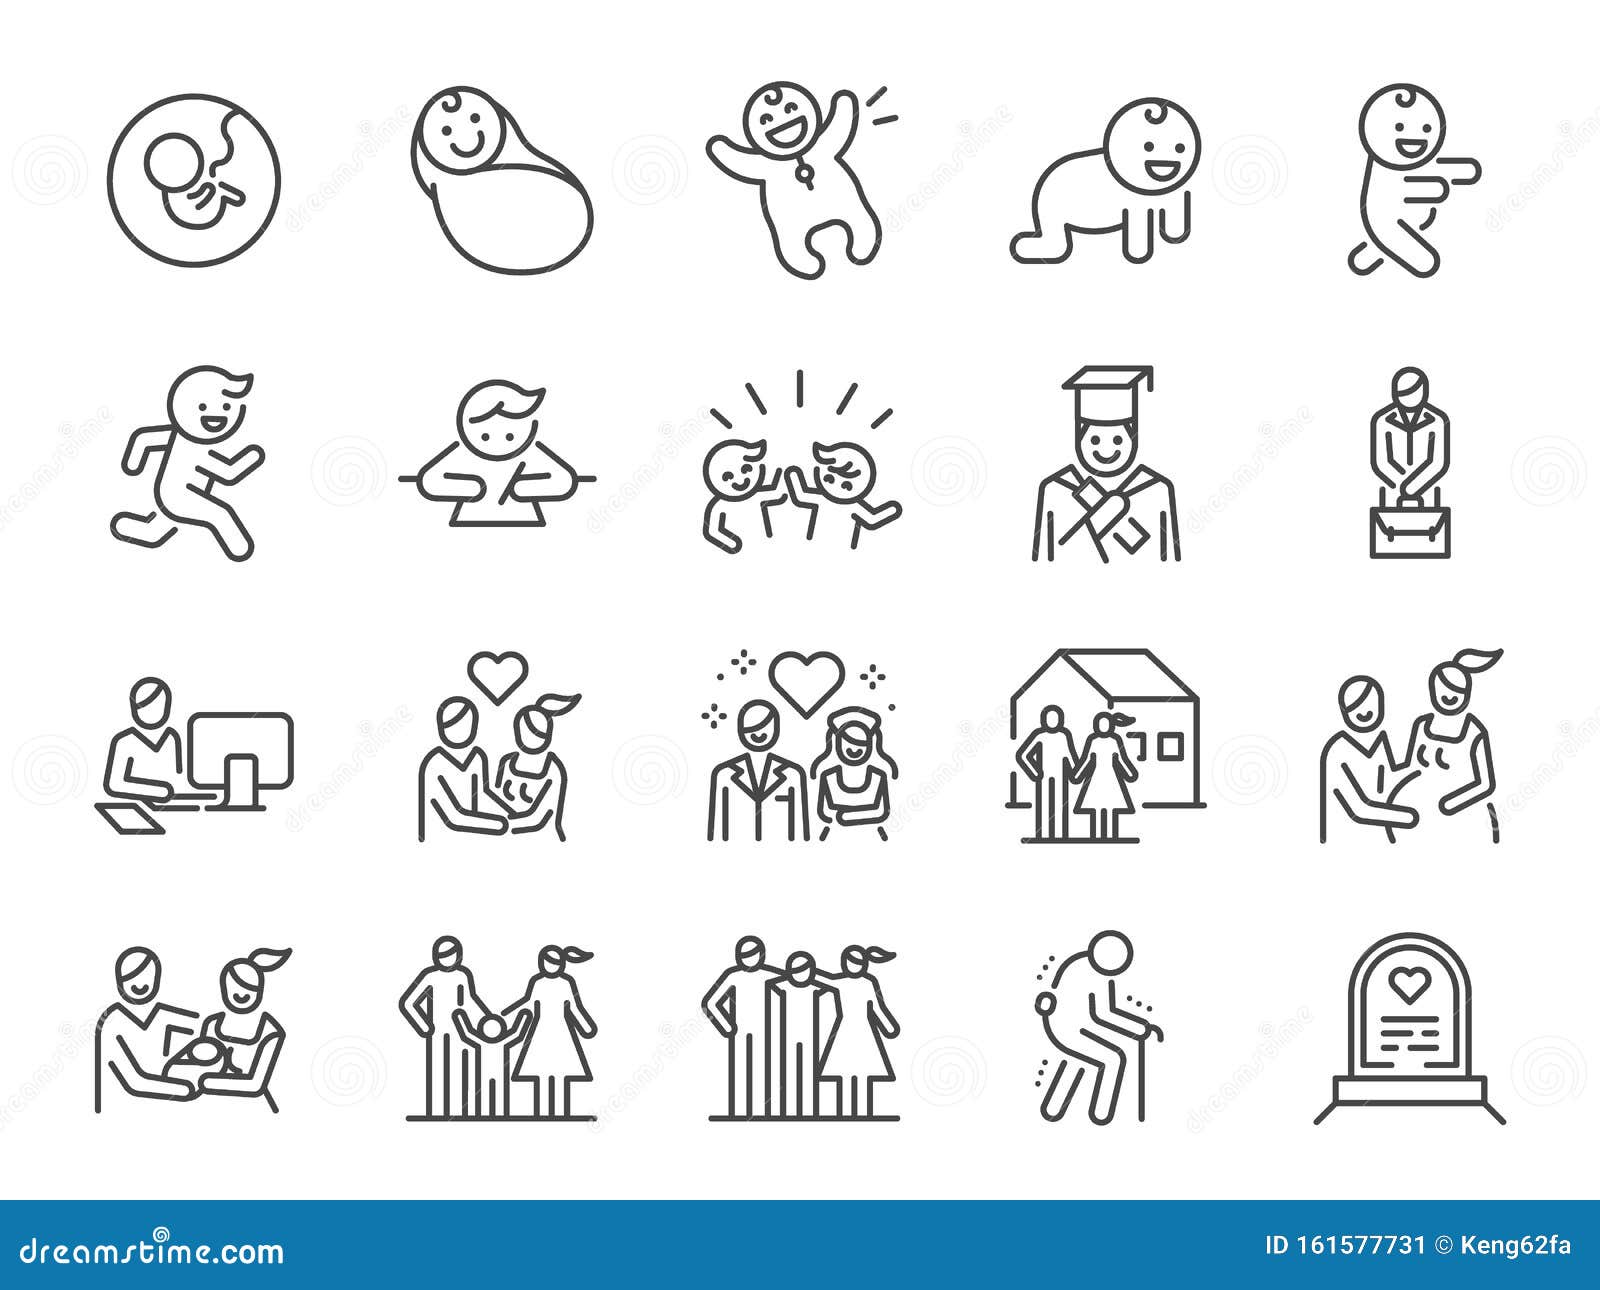 life cycle line icon set. included icons as birth, child, death, growing, family, happy and more.